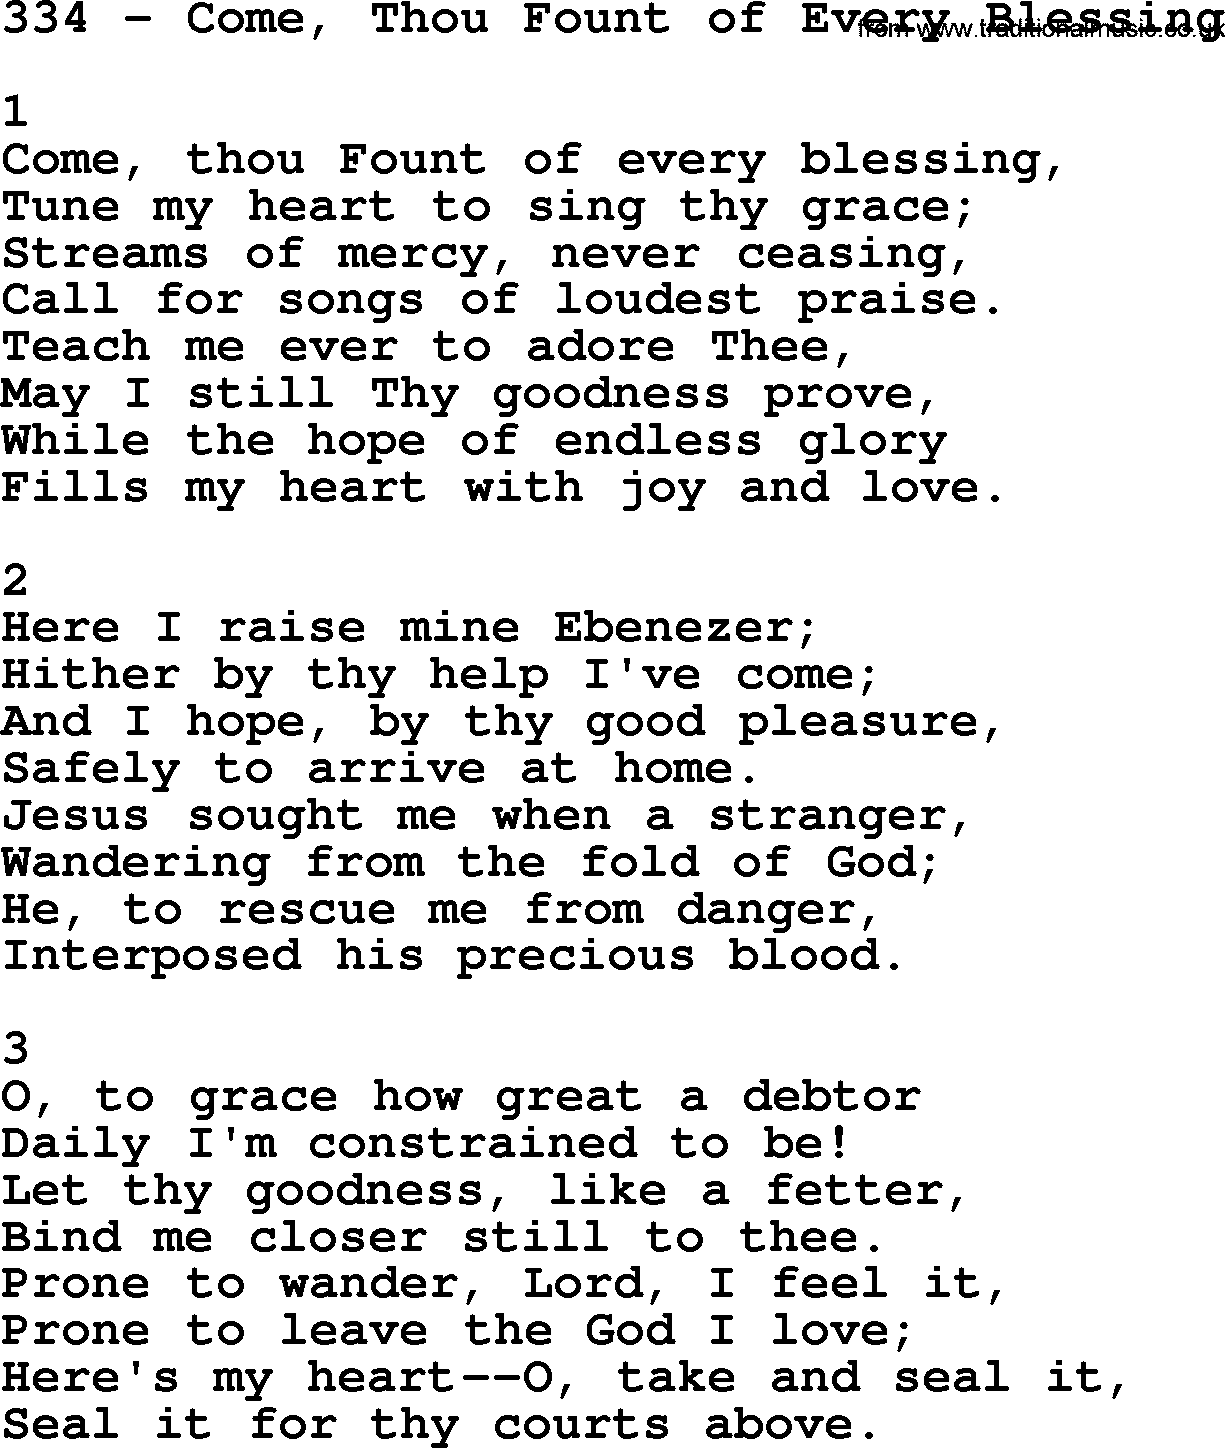 Complete Adventis Hymnal, title: 334-Come, Thou Fount Of Every Blessing, with lyrics, midi, mp3, powerpoints(PPT) and PDF,